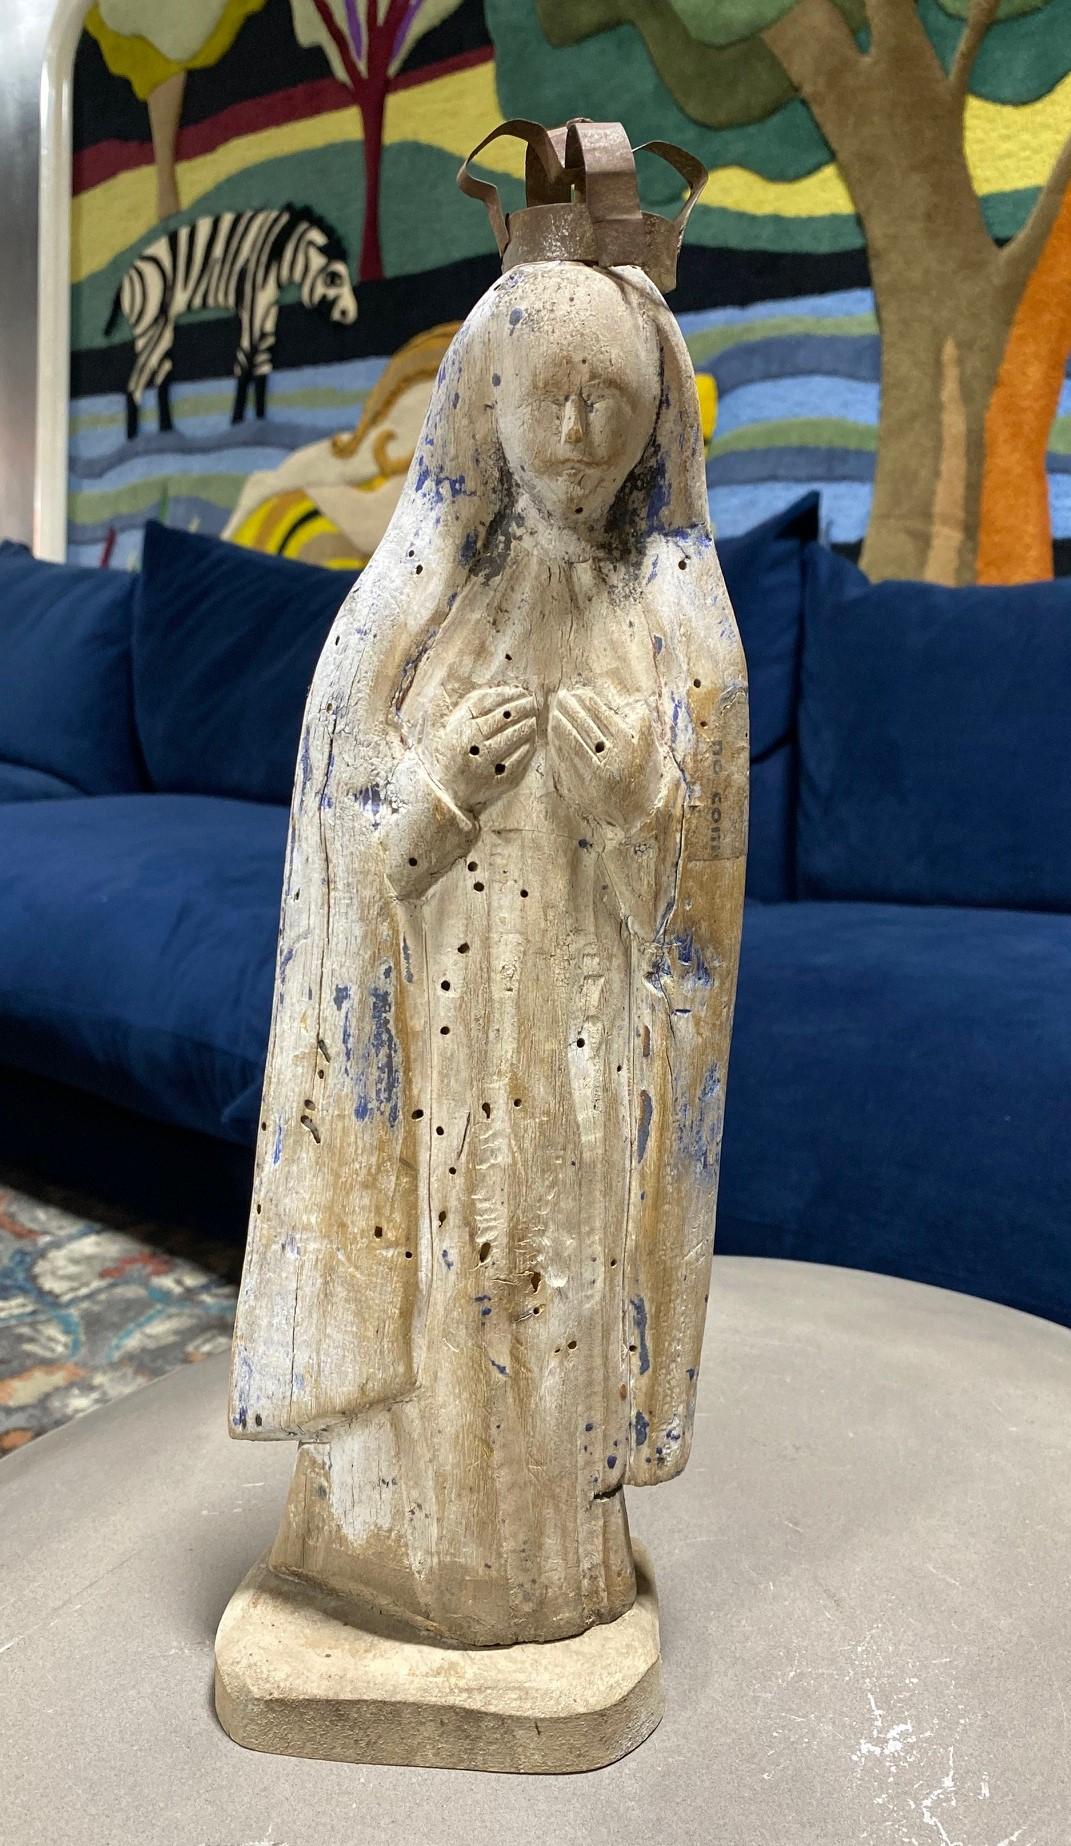 A beautiful hand-carved wood Santo of the Madonna, Mary mother of Christ. 

The piece clearly shows signs of weathering, use, and age and was likely placed outside a church or shrine for some years. The paint has faded leaving a quite attractive